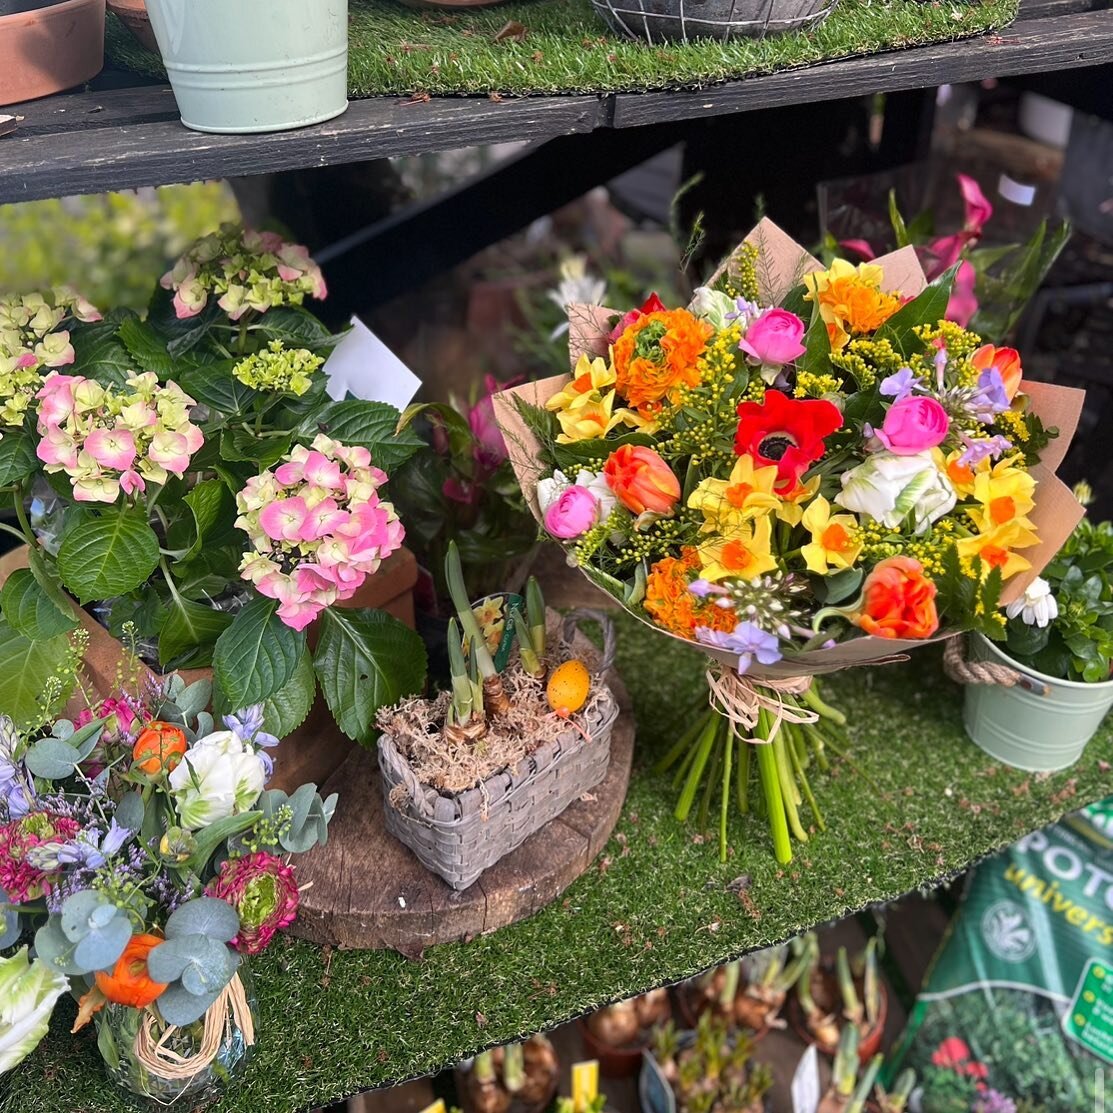 Easter goodies available this weekend!🐣
We are open all bank holiday weekend 10-4 on Friday, Sunday &amp; Monday and normal hours on Saturday💐 
#easterweekend #easter #florist #spring #springbunches